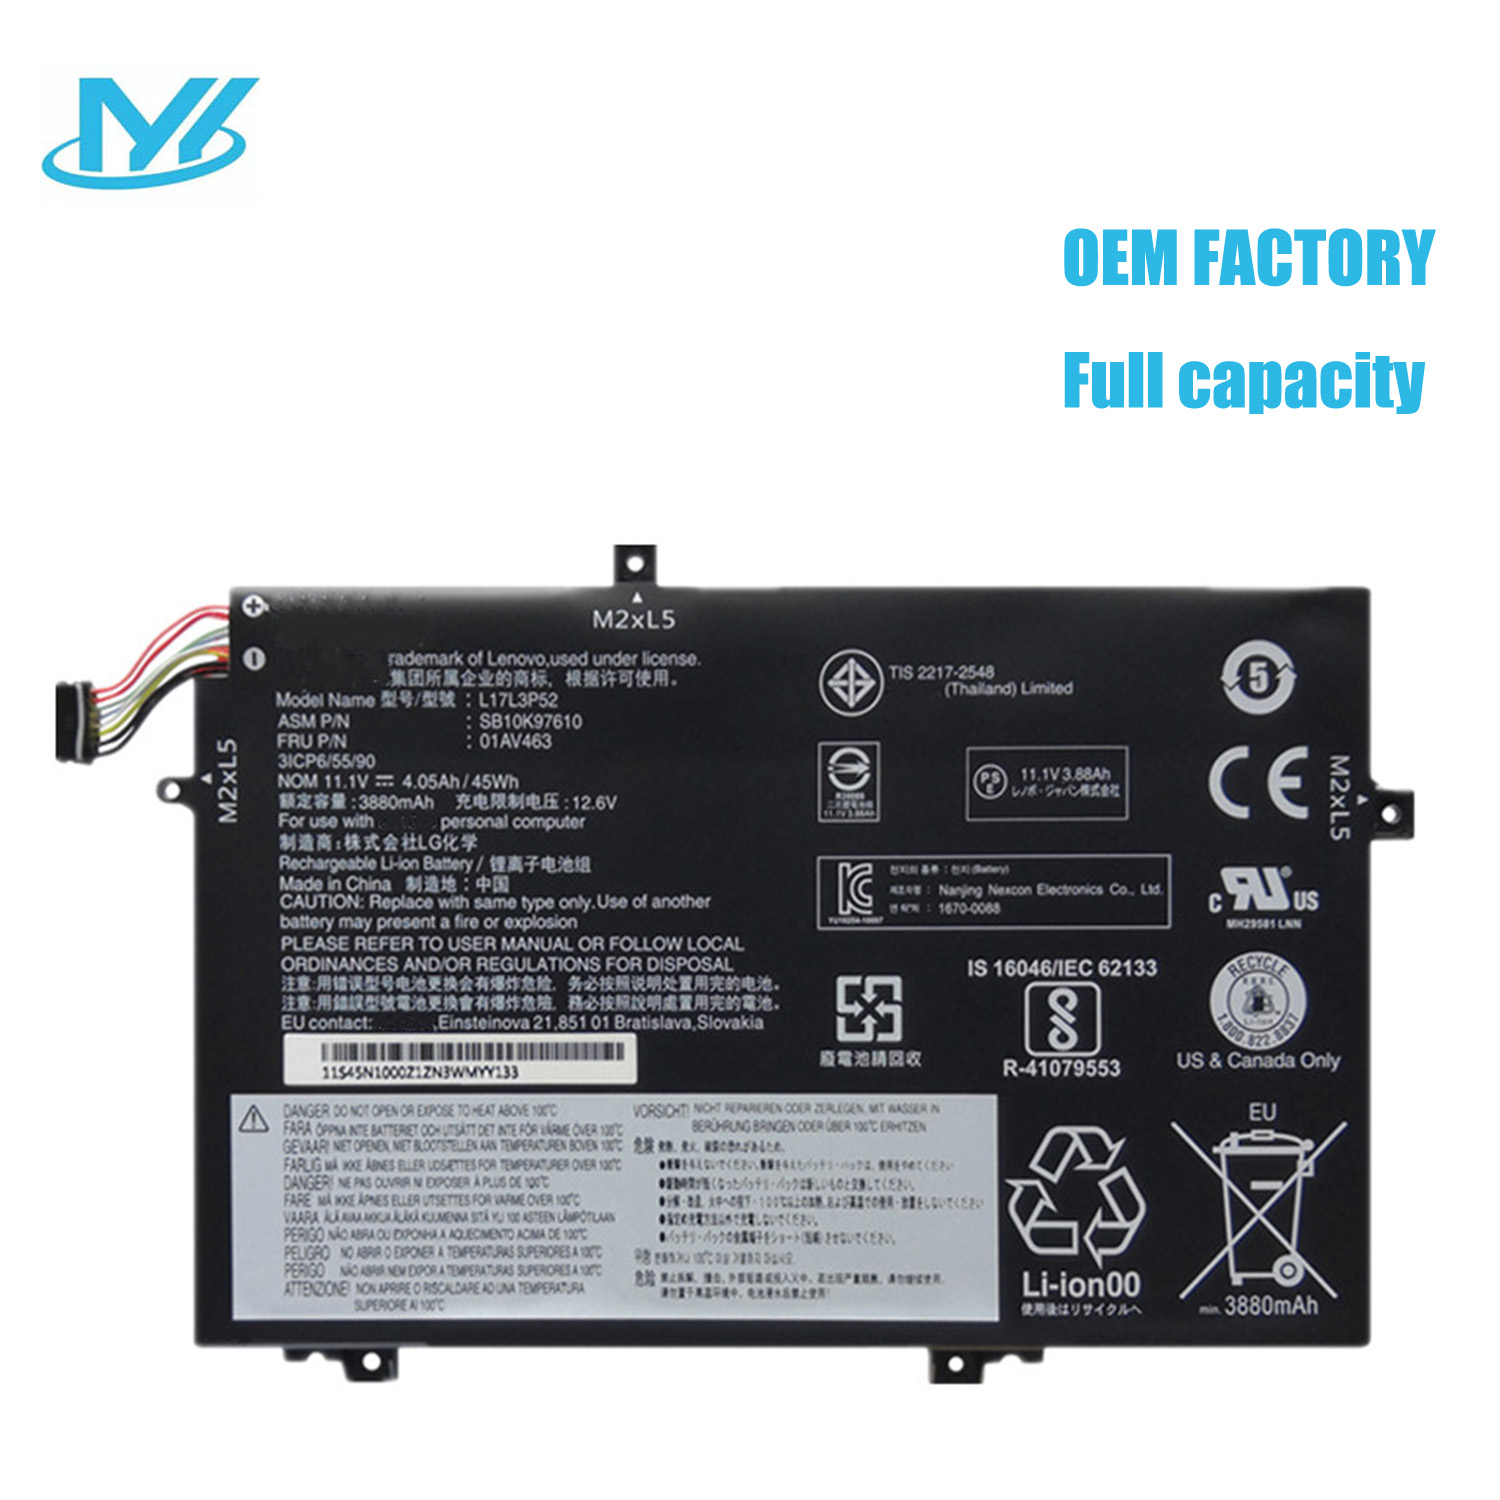 L17L3P52 rechargeable lithium ion Notebook battery Laptop battery For LenovoThinkPad L580 L590 L480 L490 Series Notebook 11.1V 45Wh 4120mAh